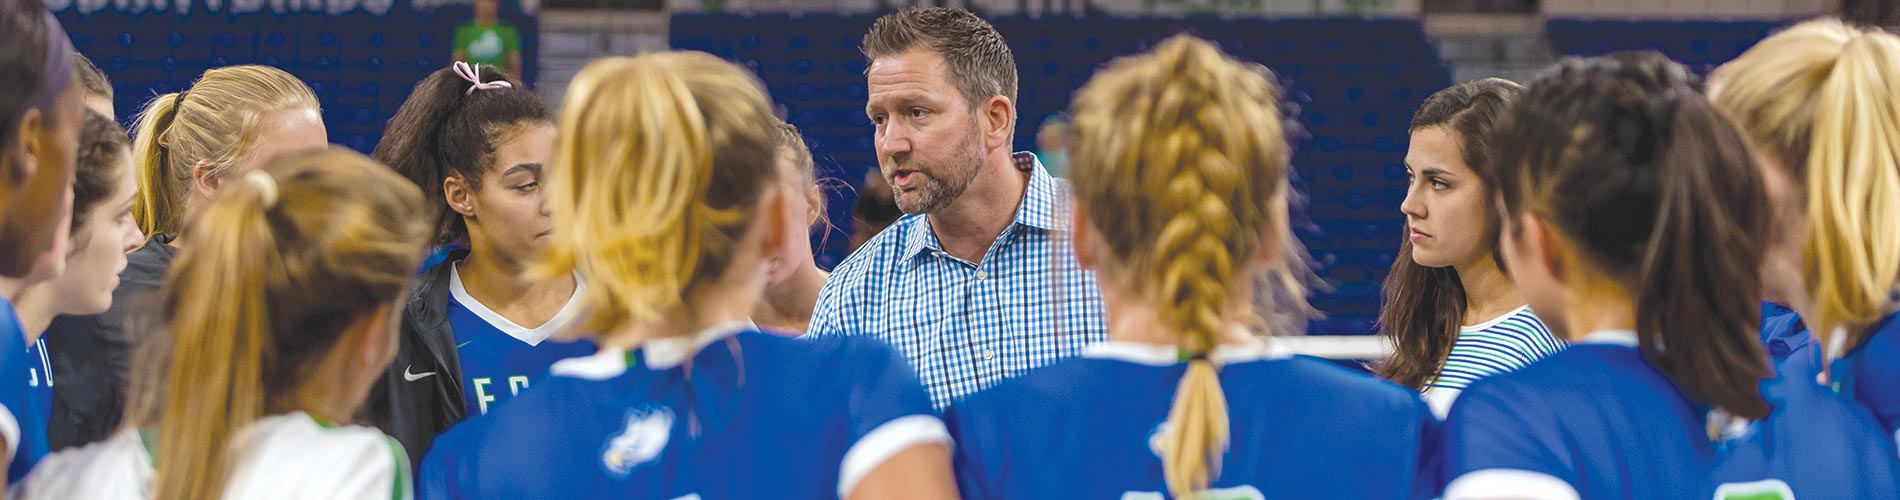 Photo of FGCU volleyball coach with team